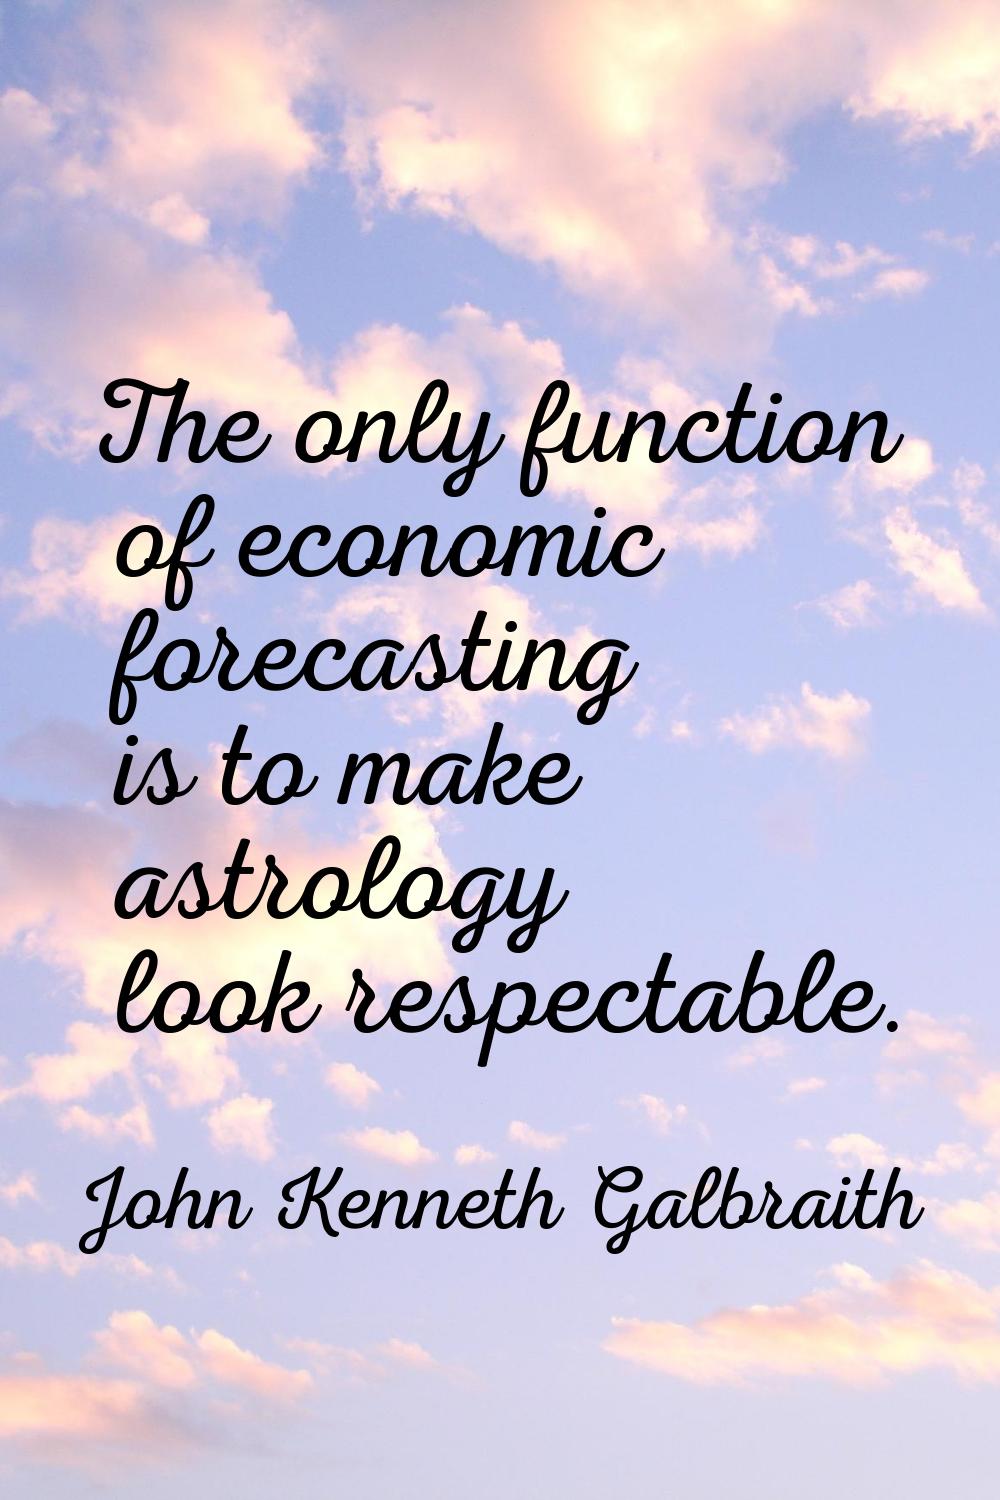 The only function of economic forecasting is to make astrology look respectable.